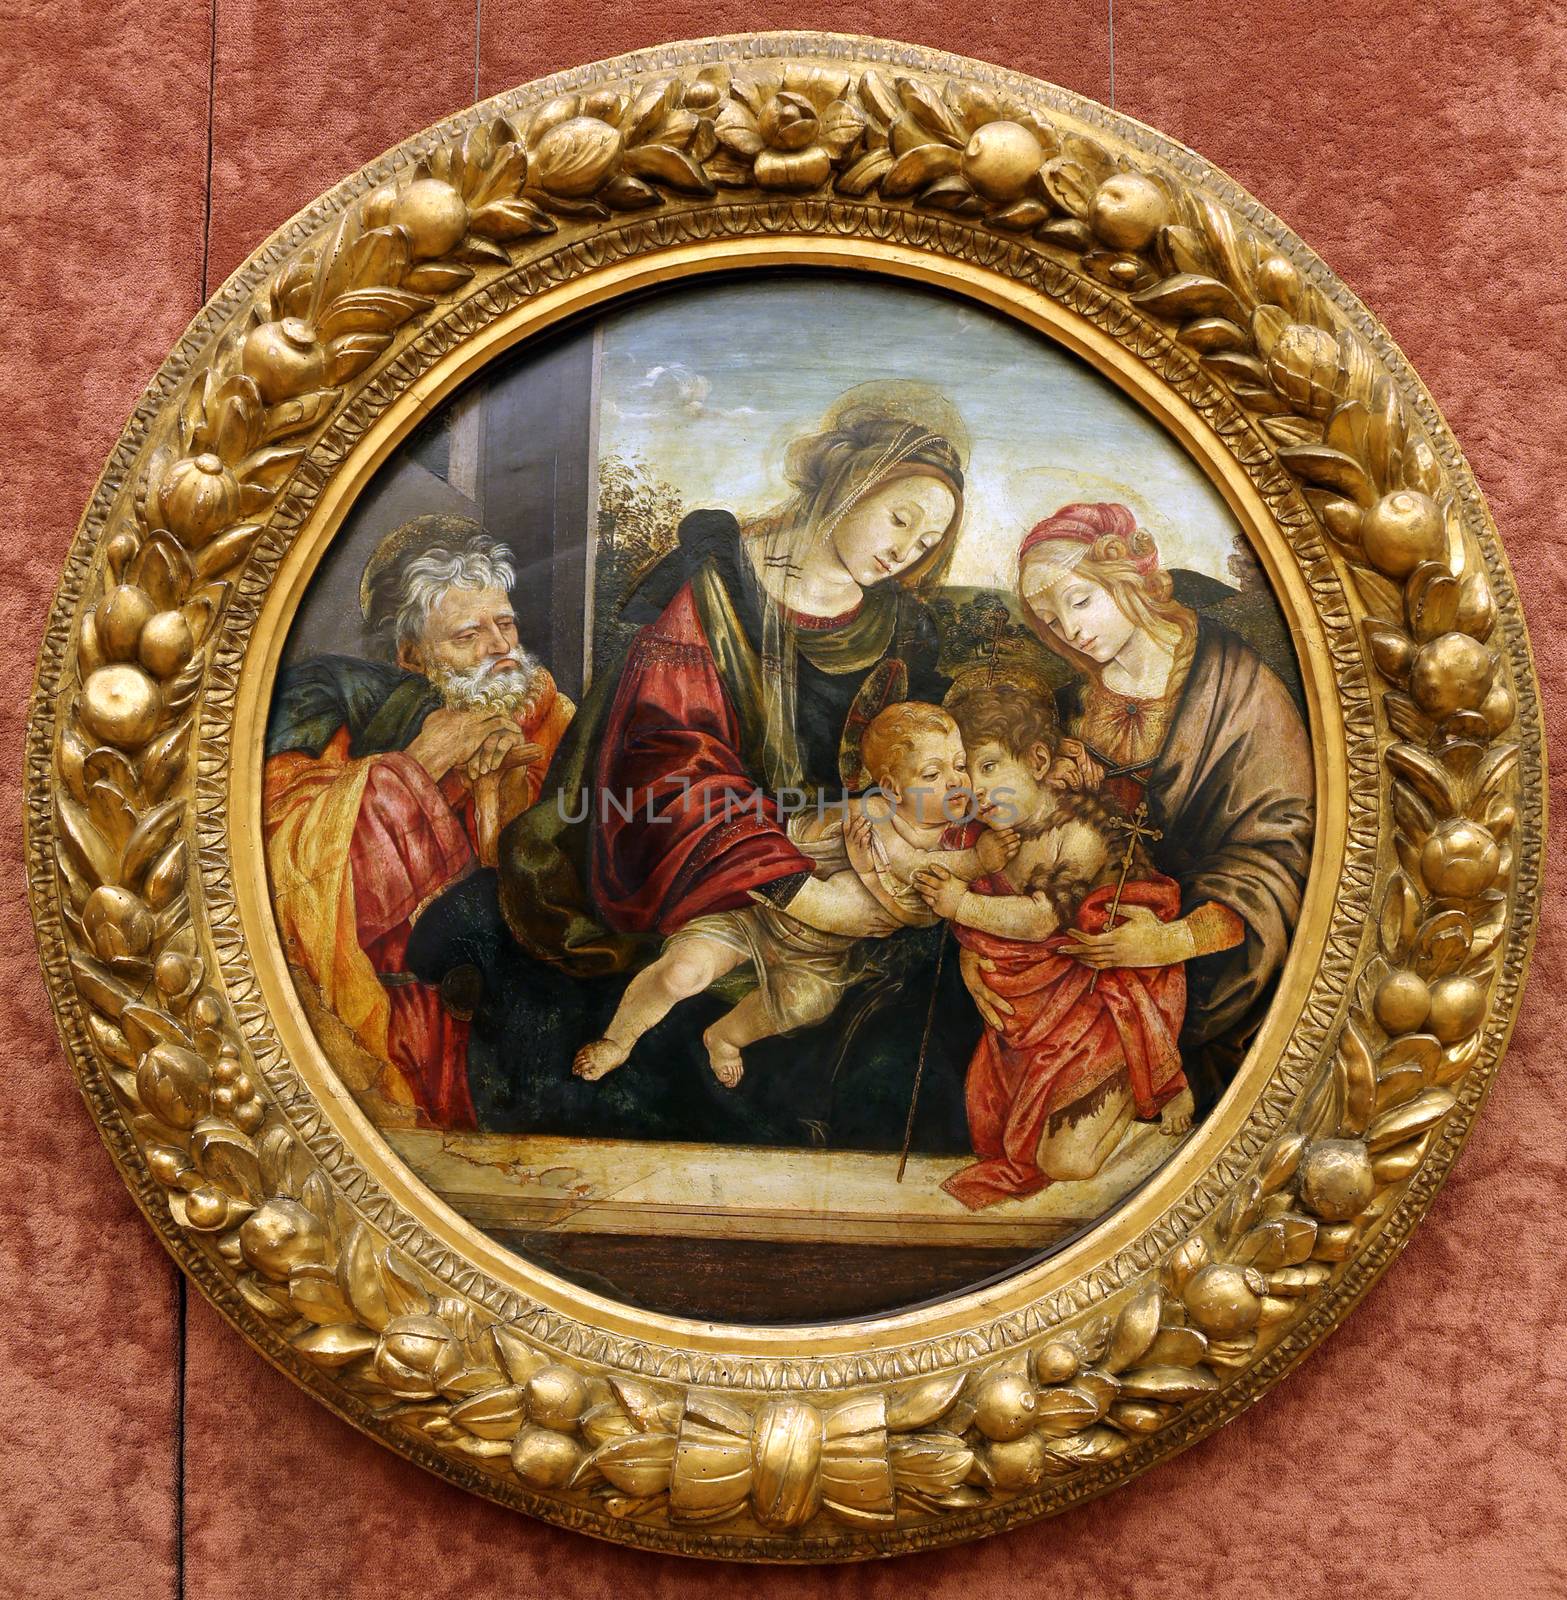 Workshop Filippino Lippi: St. Family with St. John and Elizabeth, Old Masters Collection, Croatian Academy of Sciences in Zagreb, Croatia